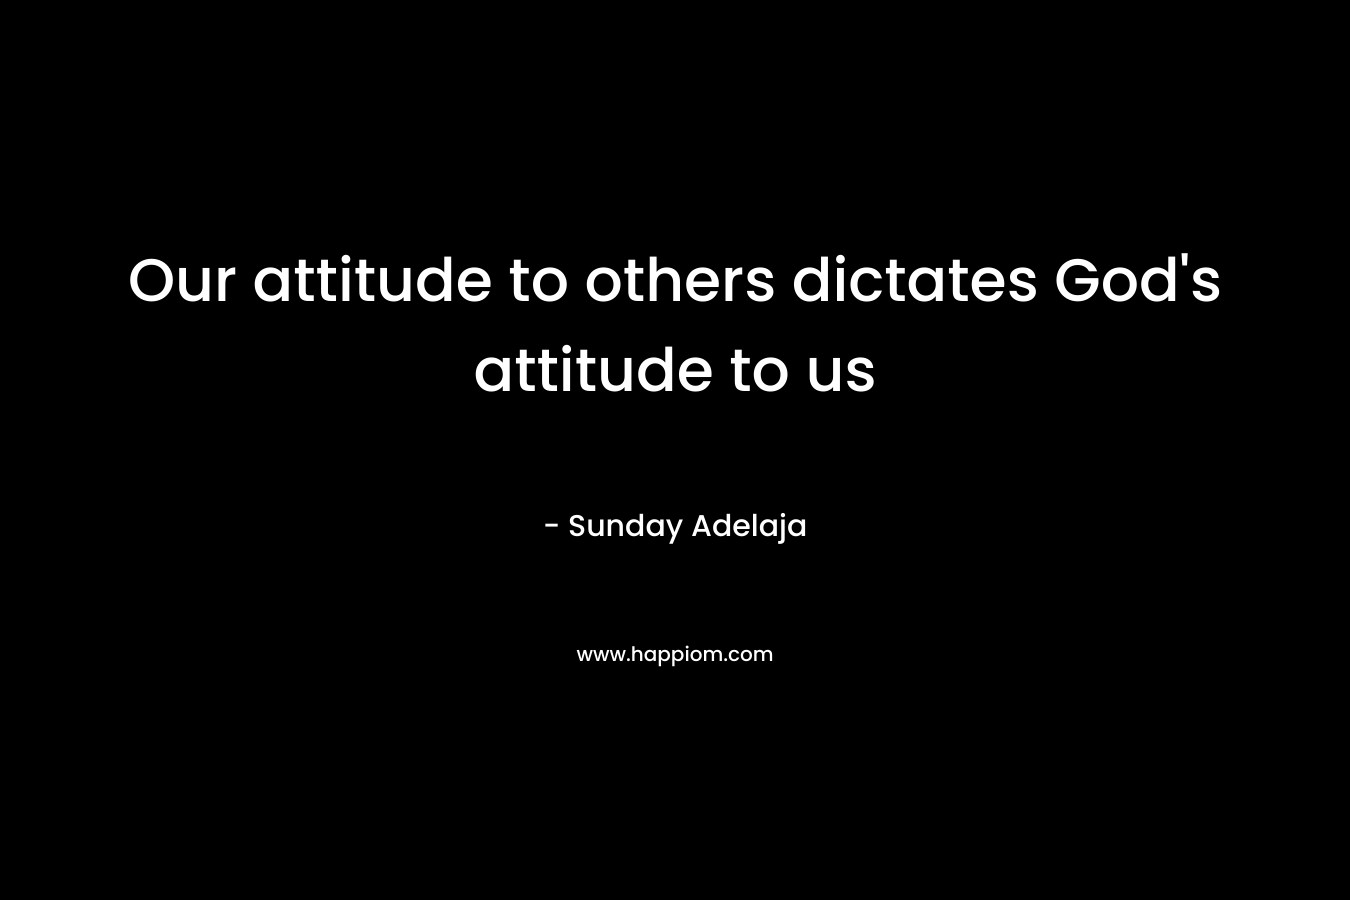 Our attitude to others dictates God's attitude to us